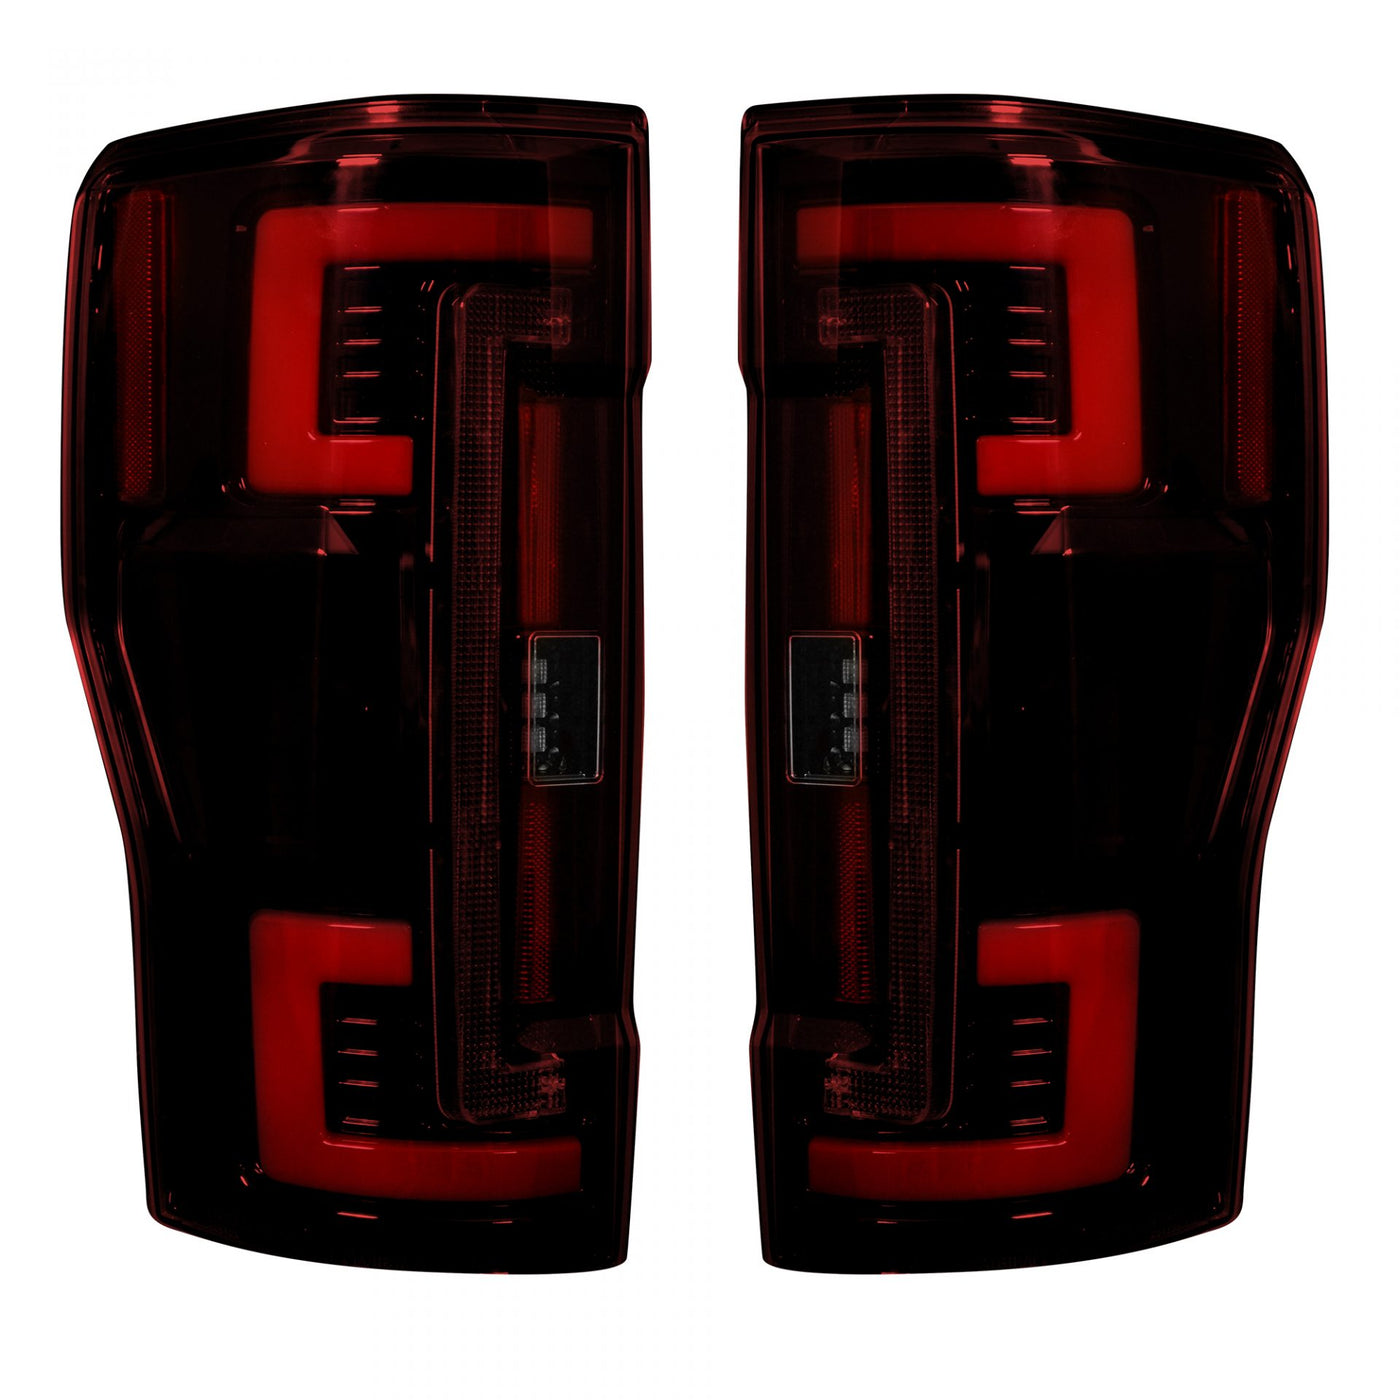 Ford Tail Lights, Ford Super Duty Tail Lights, Super Duty 17-19 Tail Lights, Tail Lights, Red Tail Lights, Ford F250 Tail Lights, Ford F350 Tail Lights, Ford F450 Tail Lights, Ford F550 Tail Lights